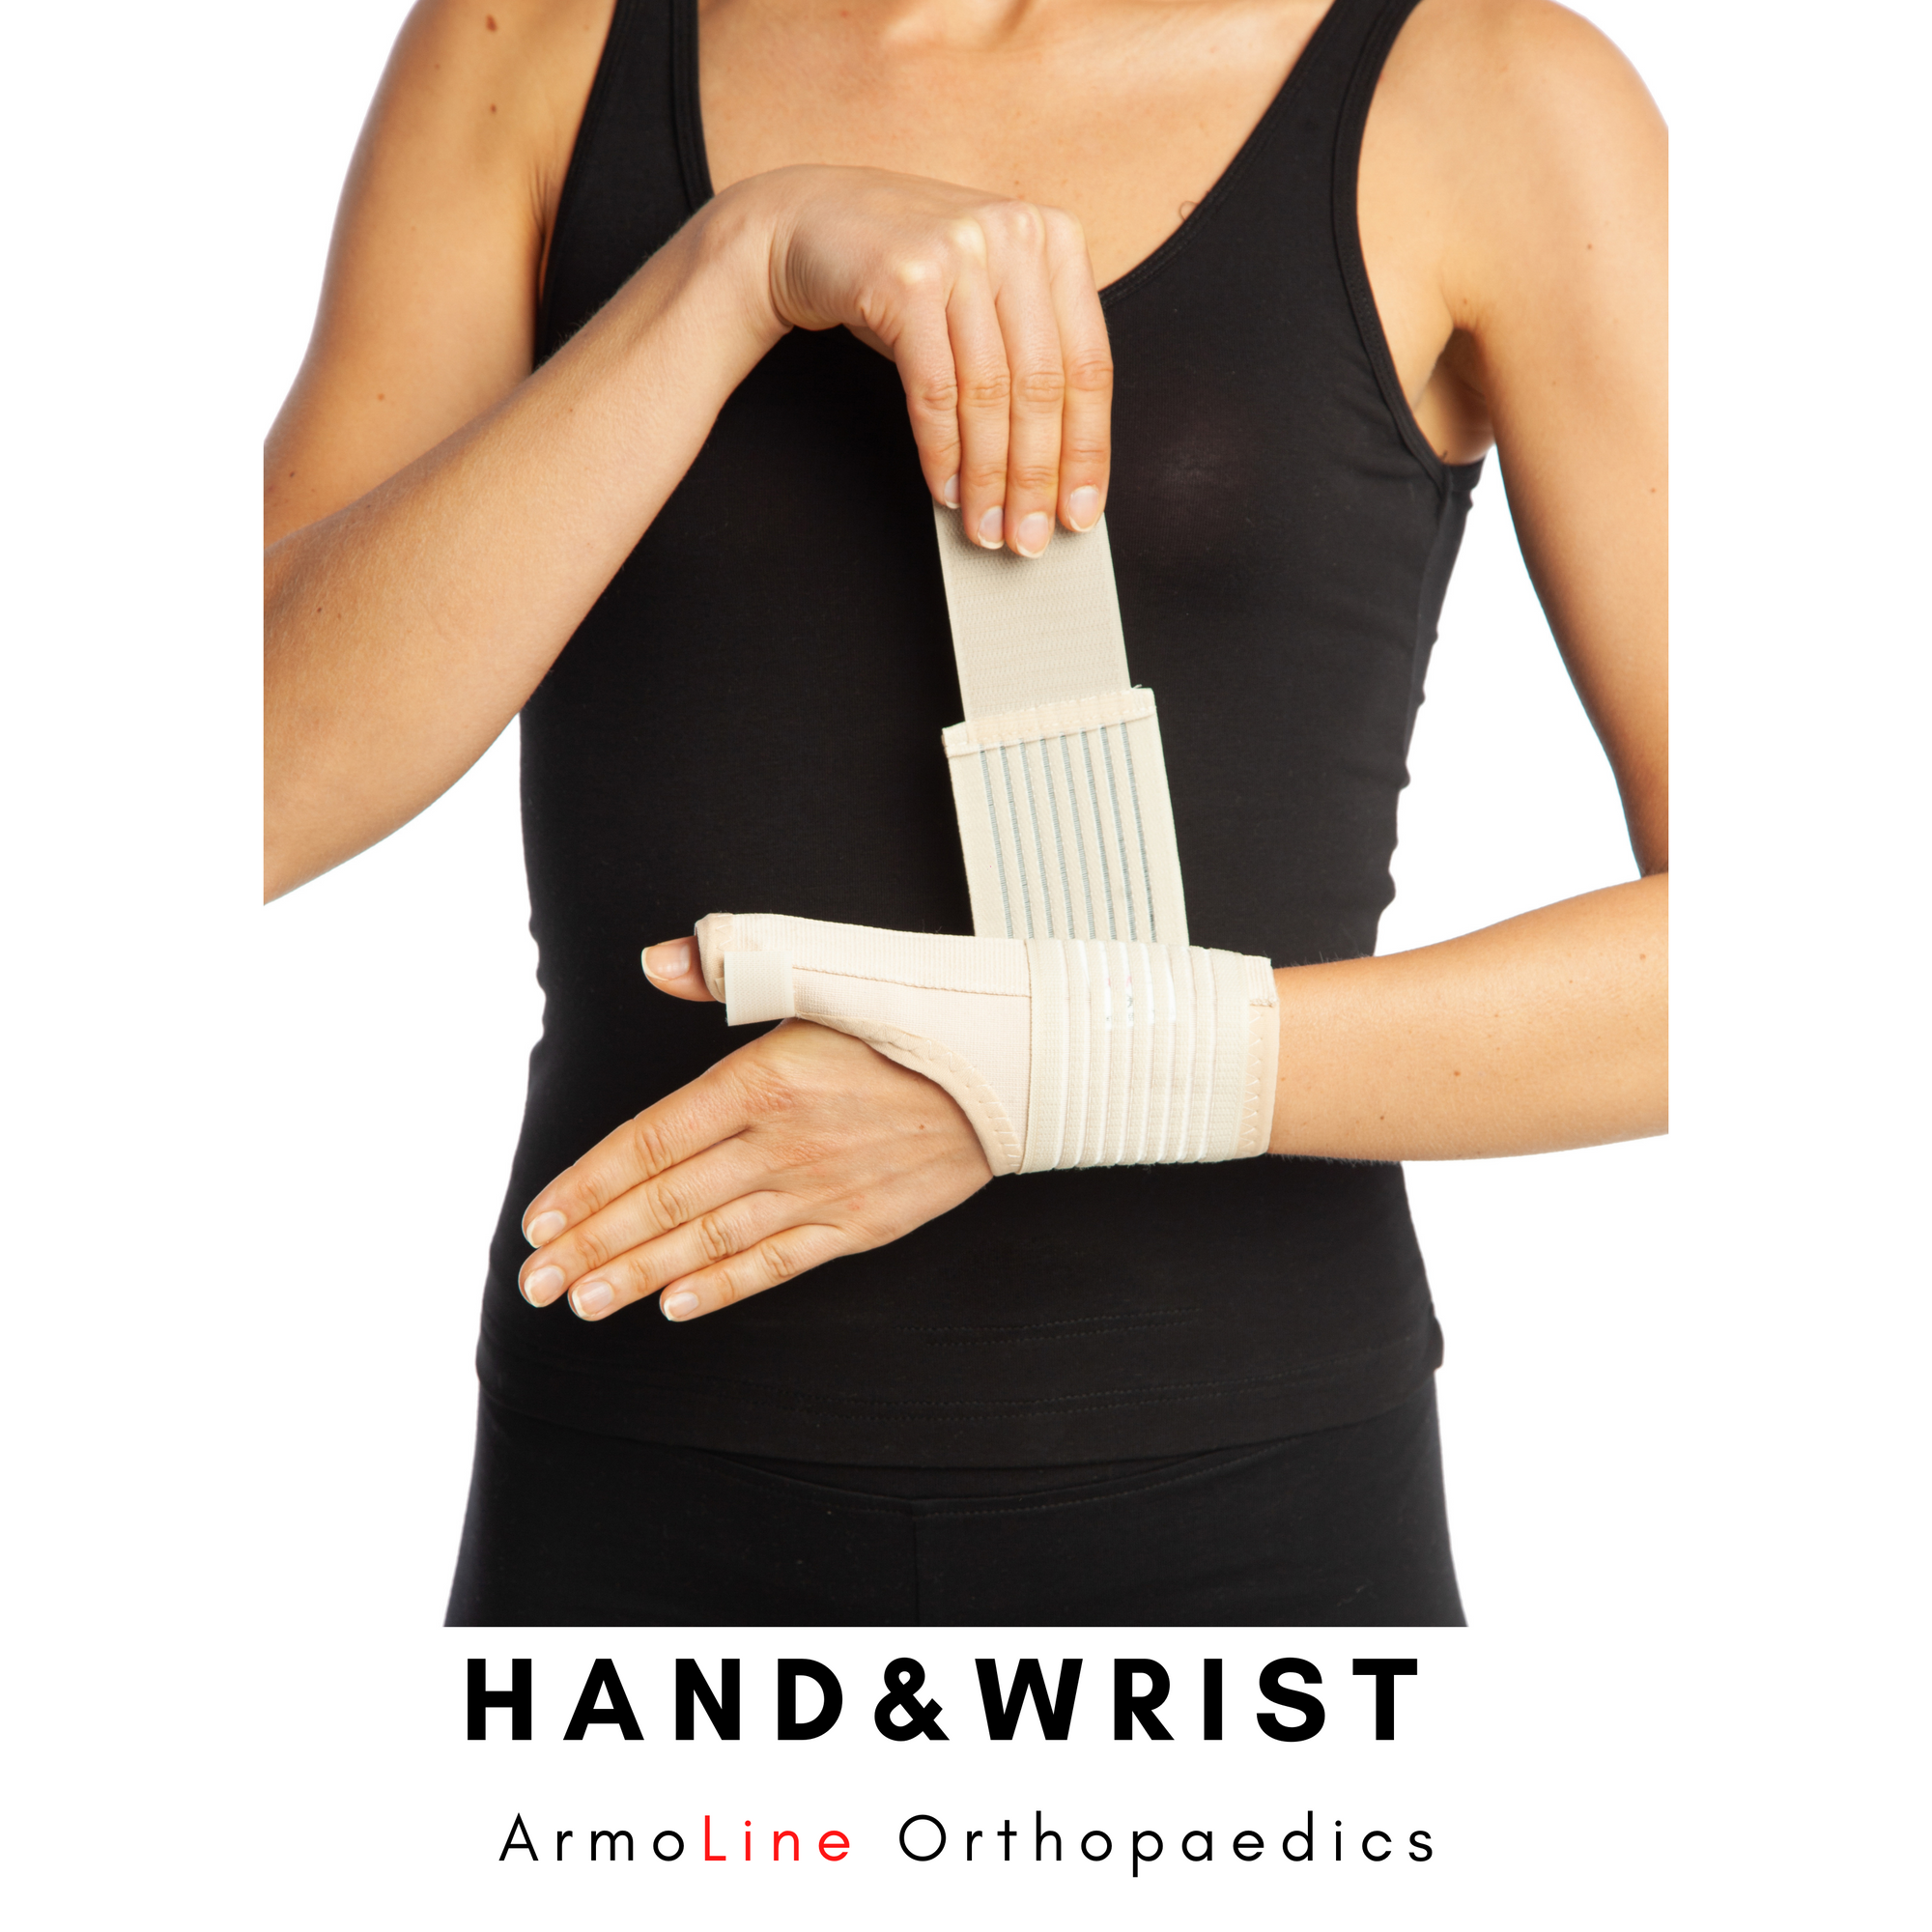 ArmoLine Hand and Wrist Supports Collection Page Link Photo. Beige colour ArmoLine De Quervain Thumb splint is worn by the model